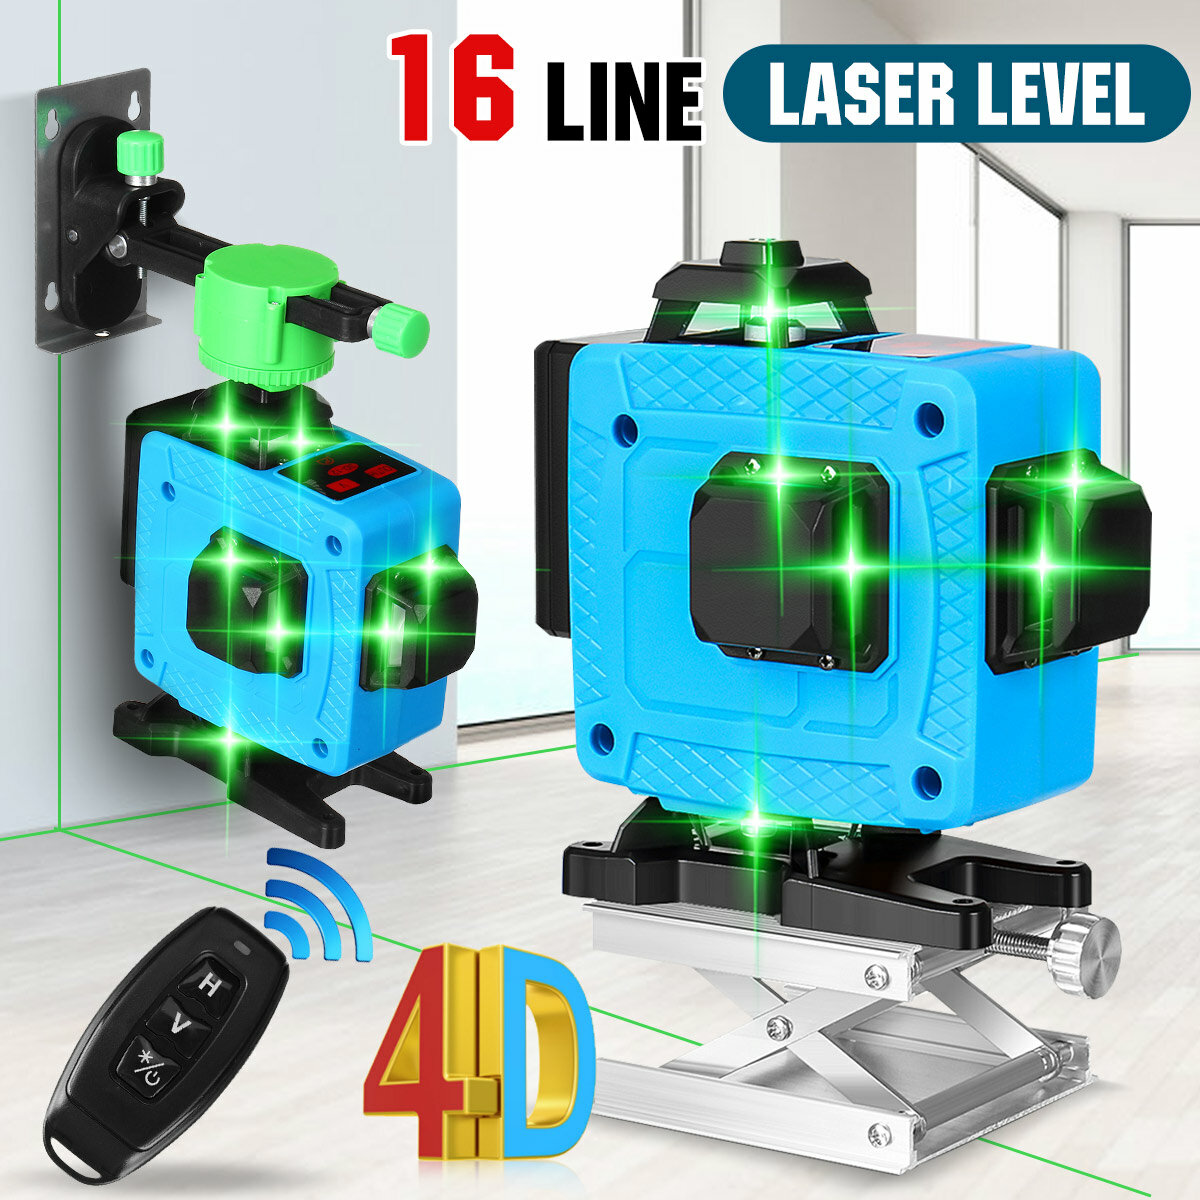 Image of 16 Line 4D Laser Level Green Light Auto Self Leveling Cross 360° Rotary Measure